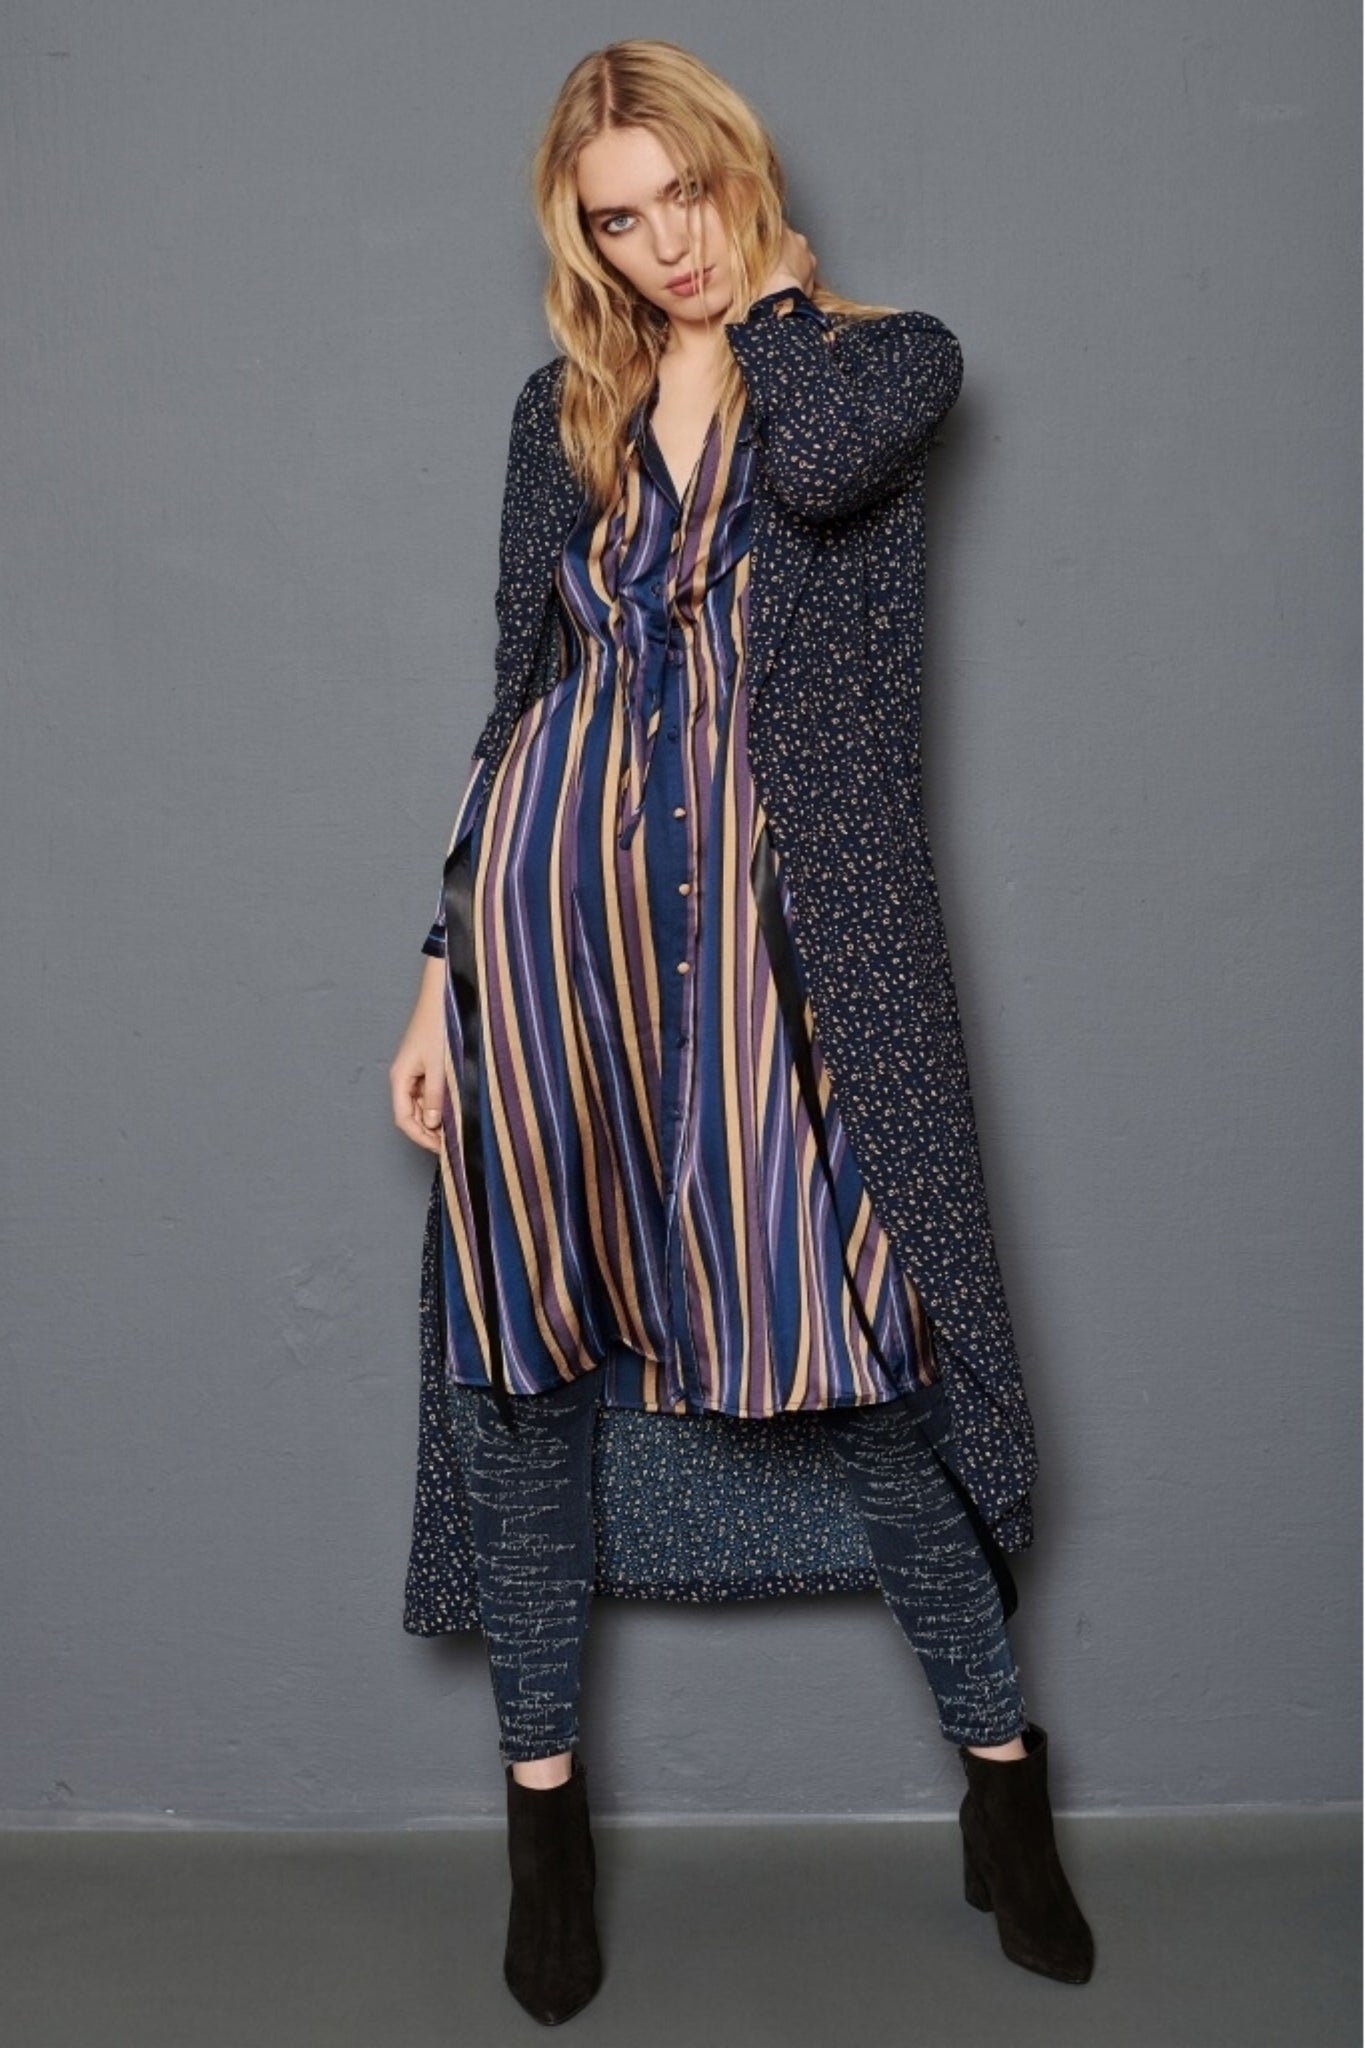 Buy NU Denmark Allie Dress in Midnight Stripe online now at Smoke and Mirrors Boutique. Shop NU Denmark Allie Dress with AfterPay ZipPay and Free Shipping. NU Denmark Australian Stockist.